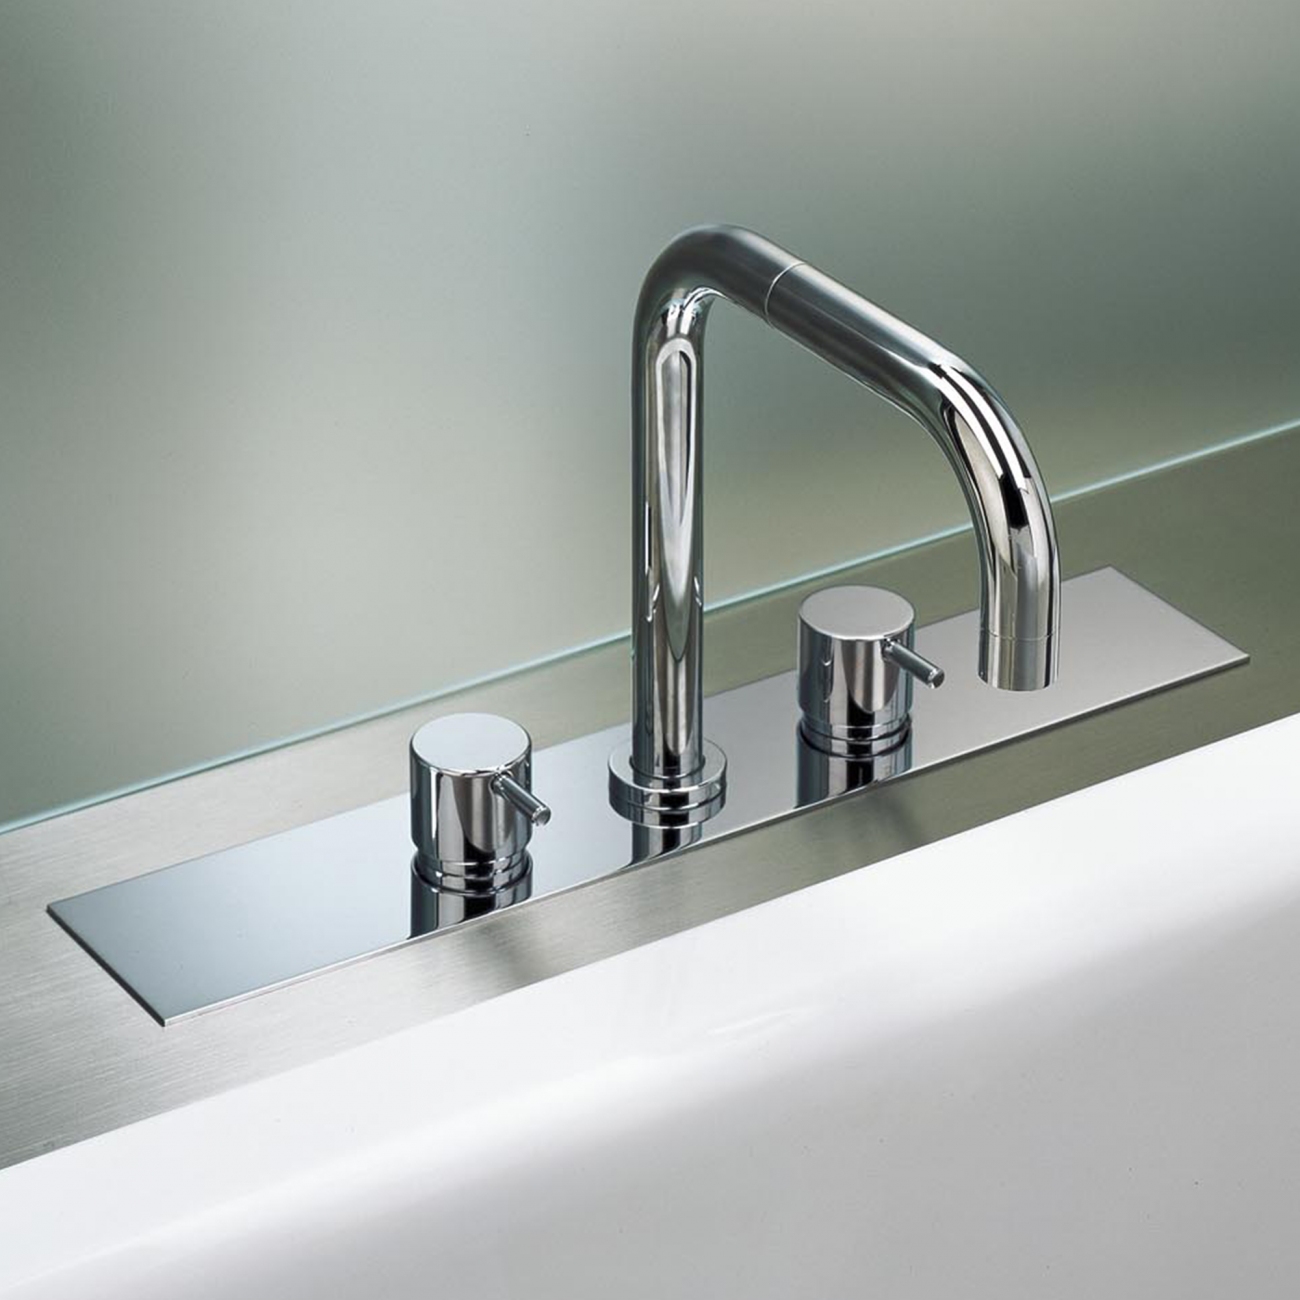 Vola BK6 Two-handle mixer for bath